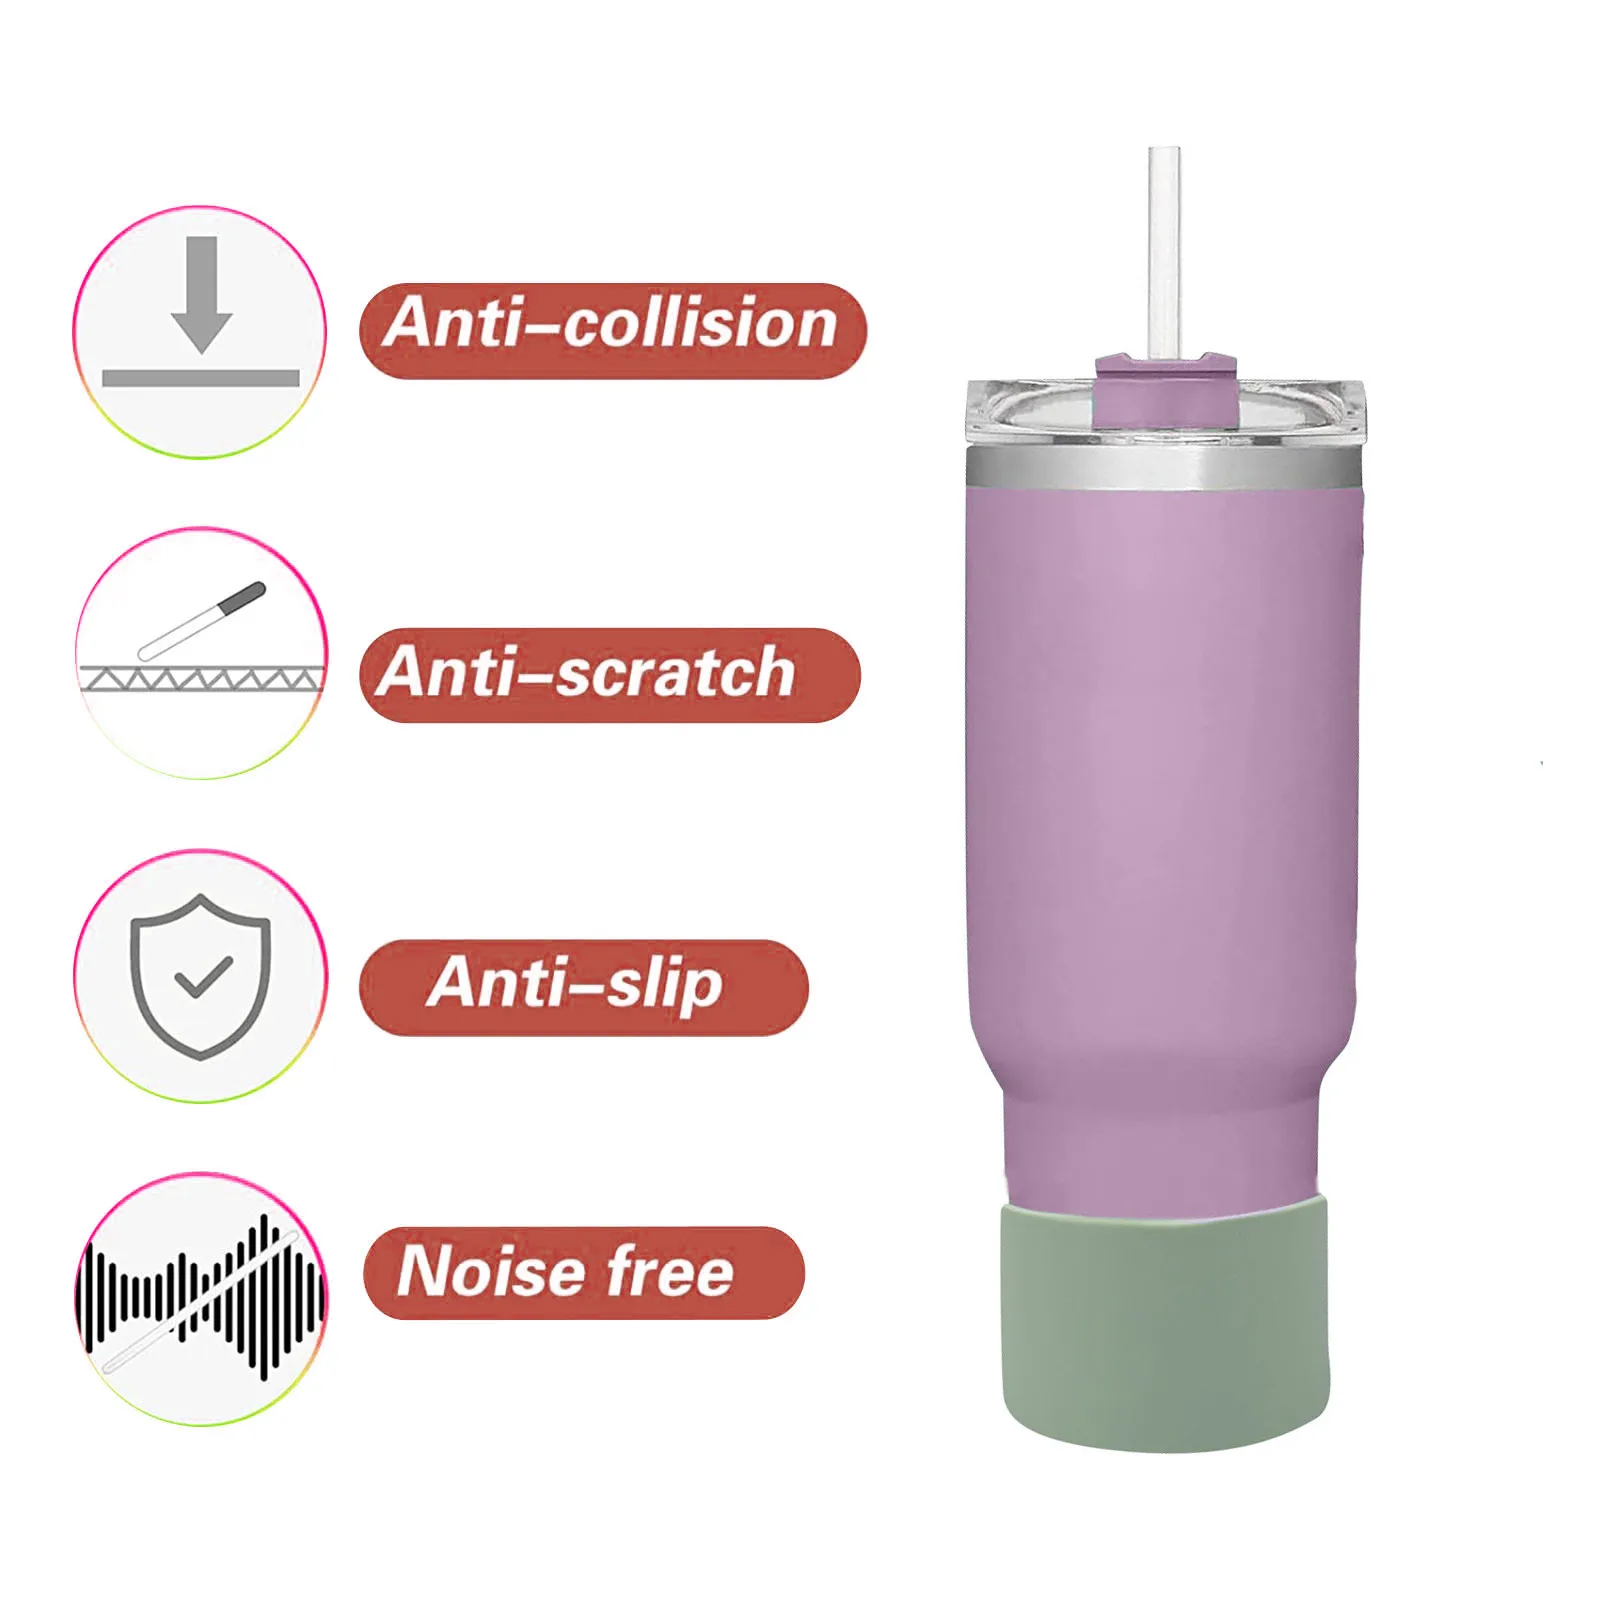 https://ae01.alicdn.com/kf/S772e15ecd8cc4a35840e59fc6fa90d9bG/Silicone-Water-Bottle-Bottom-Sleeve-Cover-Silicone-Boot-For-Sports-Insulation-Cup-Protective-Cup-Accessories-Botella.jpg